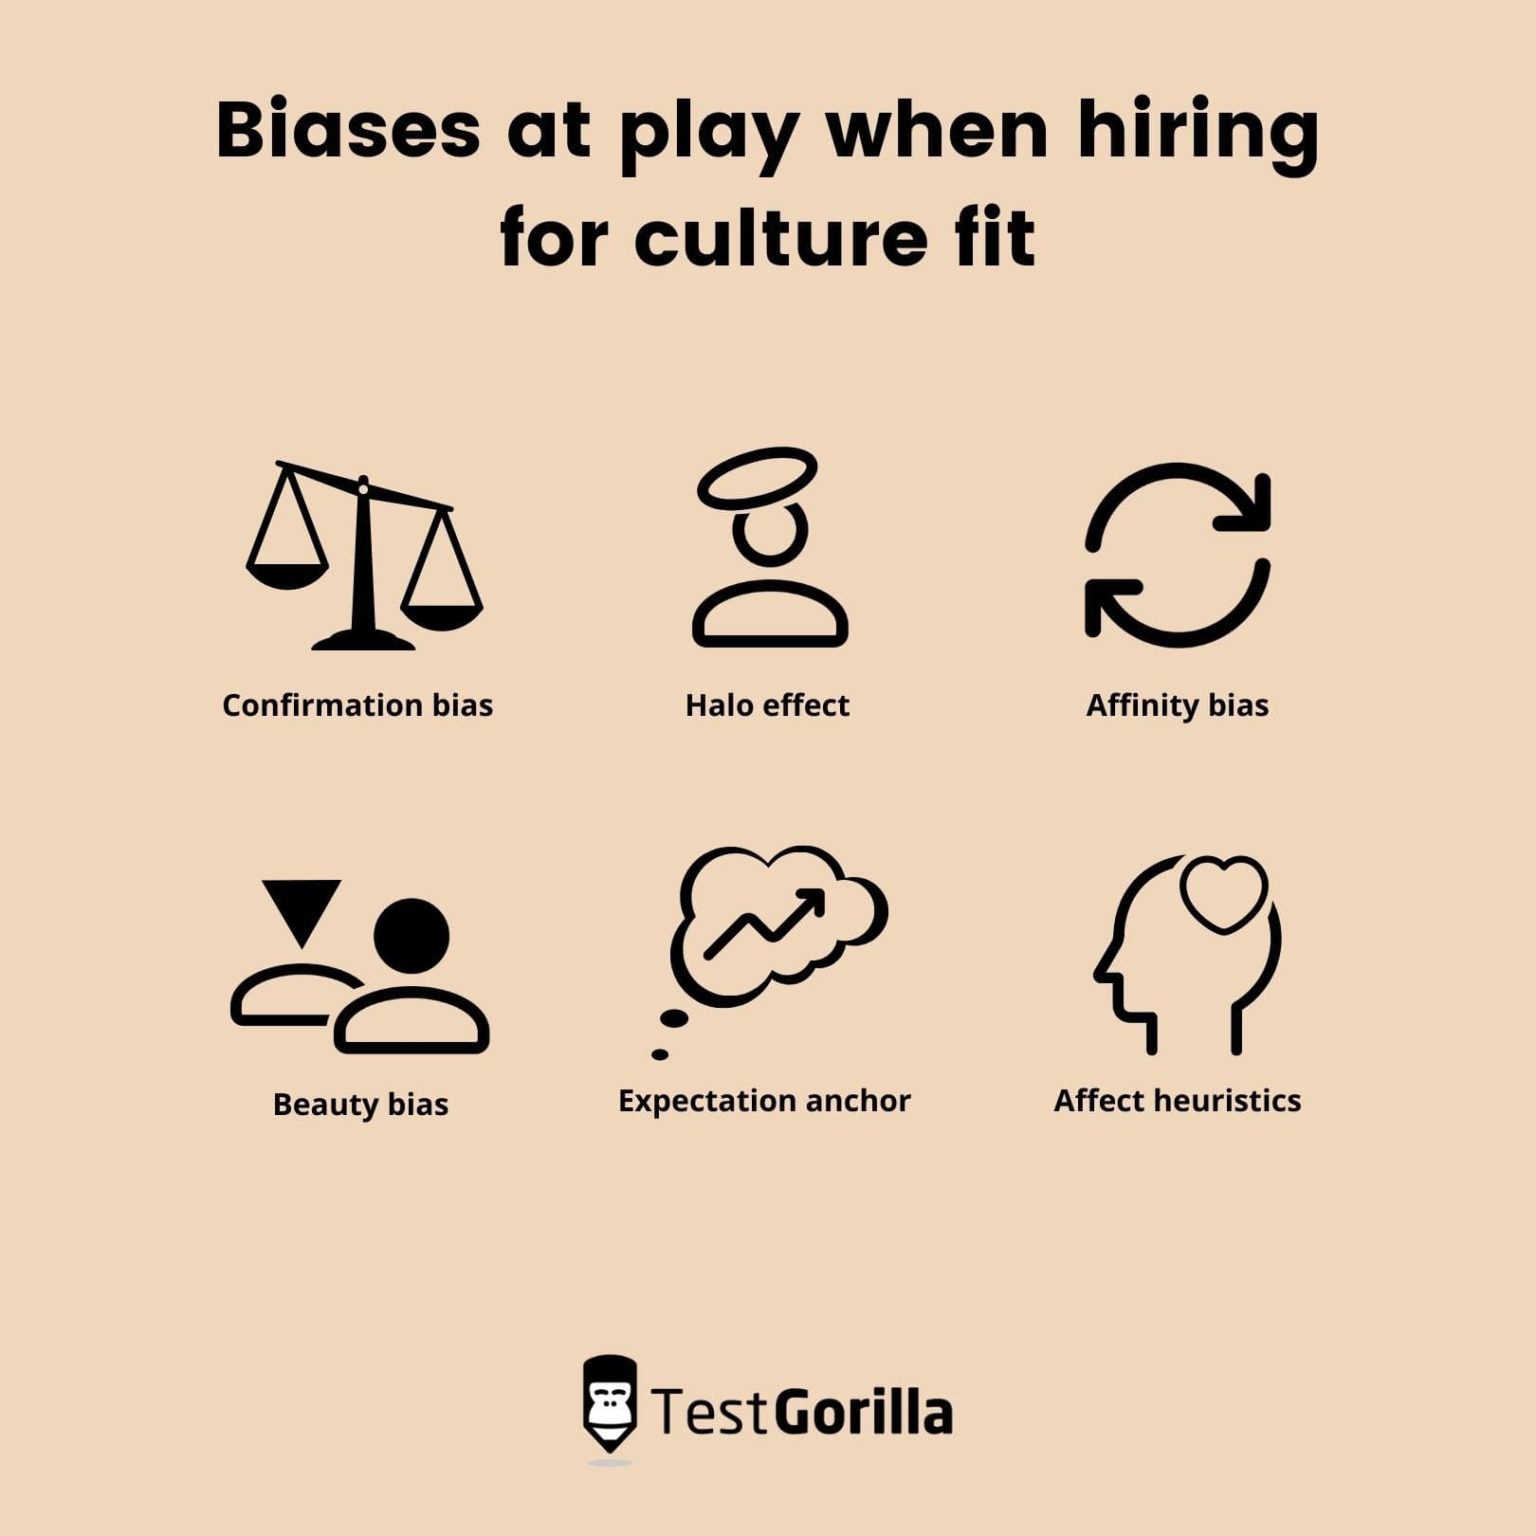 graphic showing biases at play when hiring for culture fit